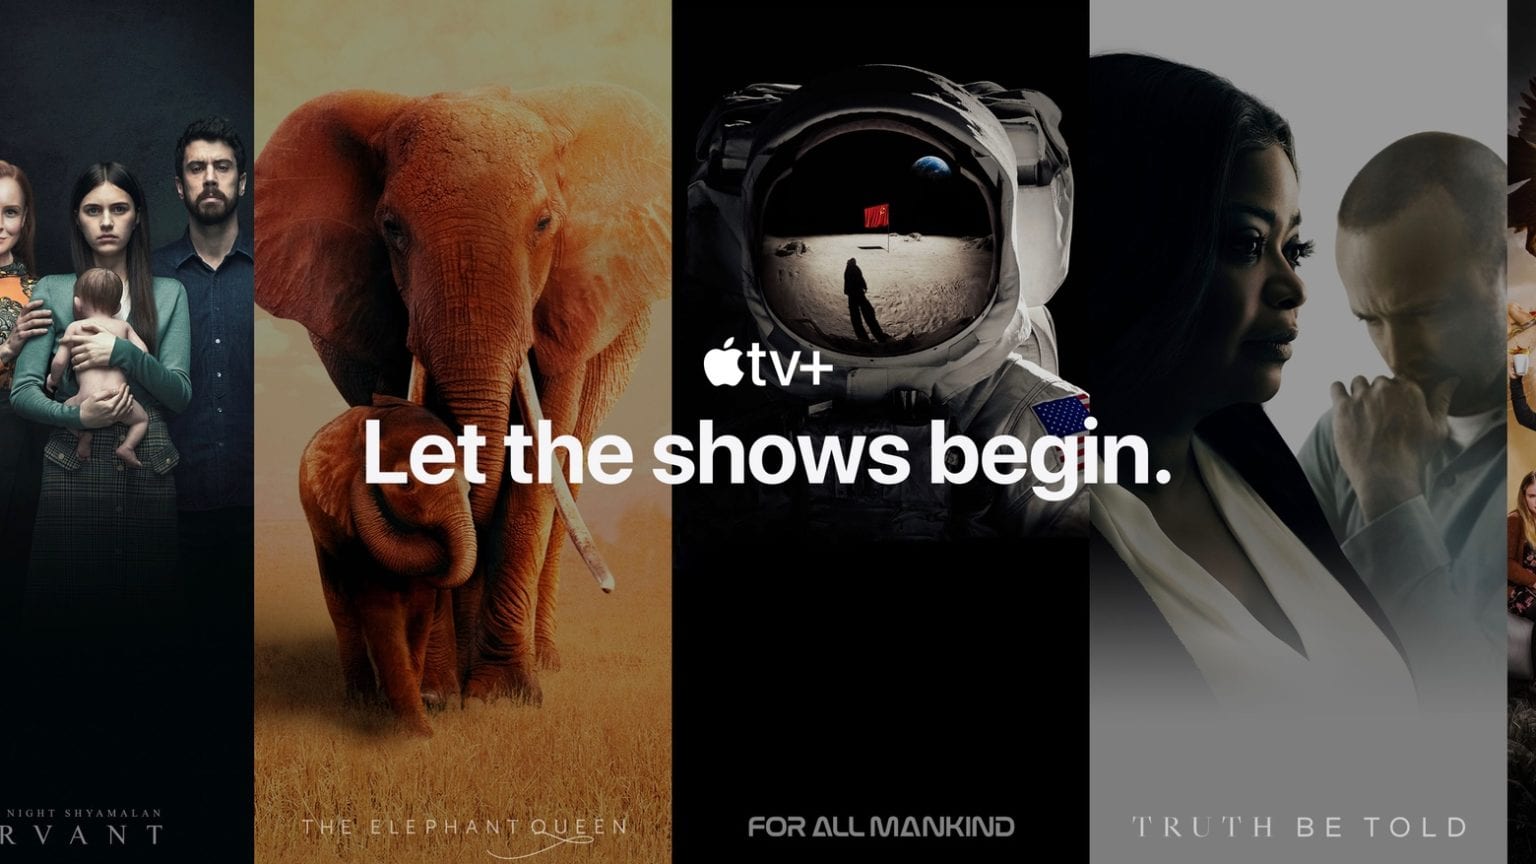 Apple TV+ has a growing amount of content